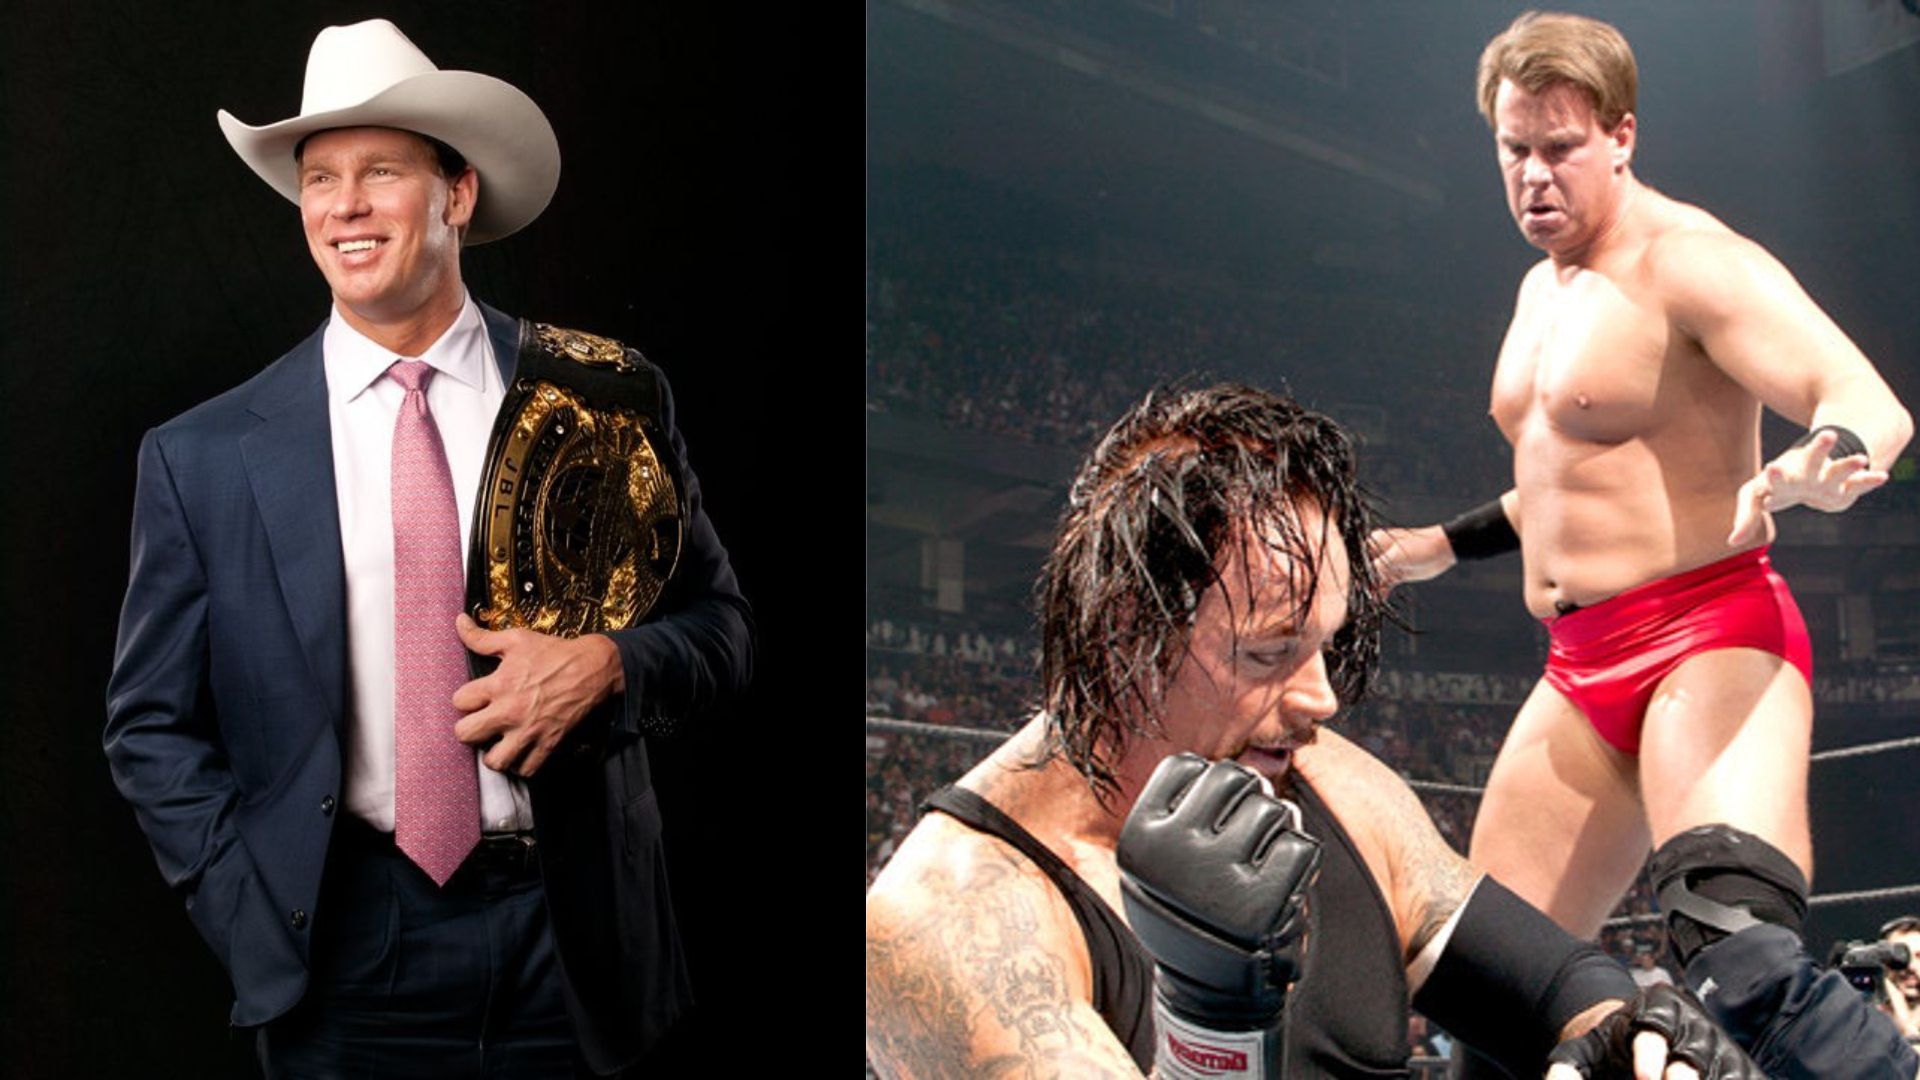 JBL was a prominent heel during his WWE Championship reign